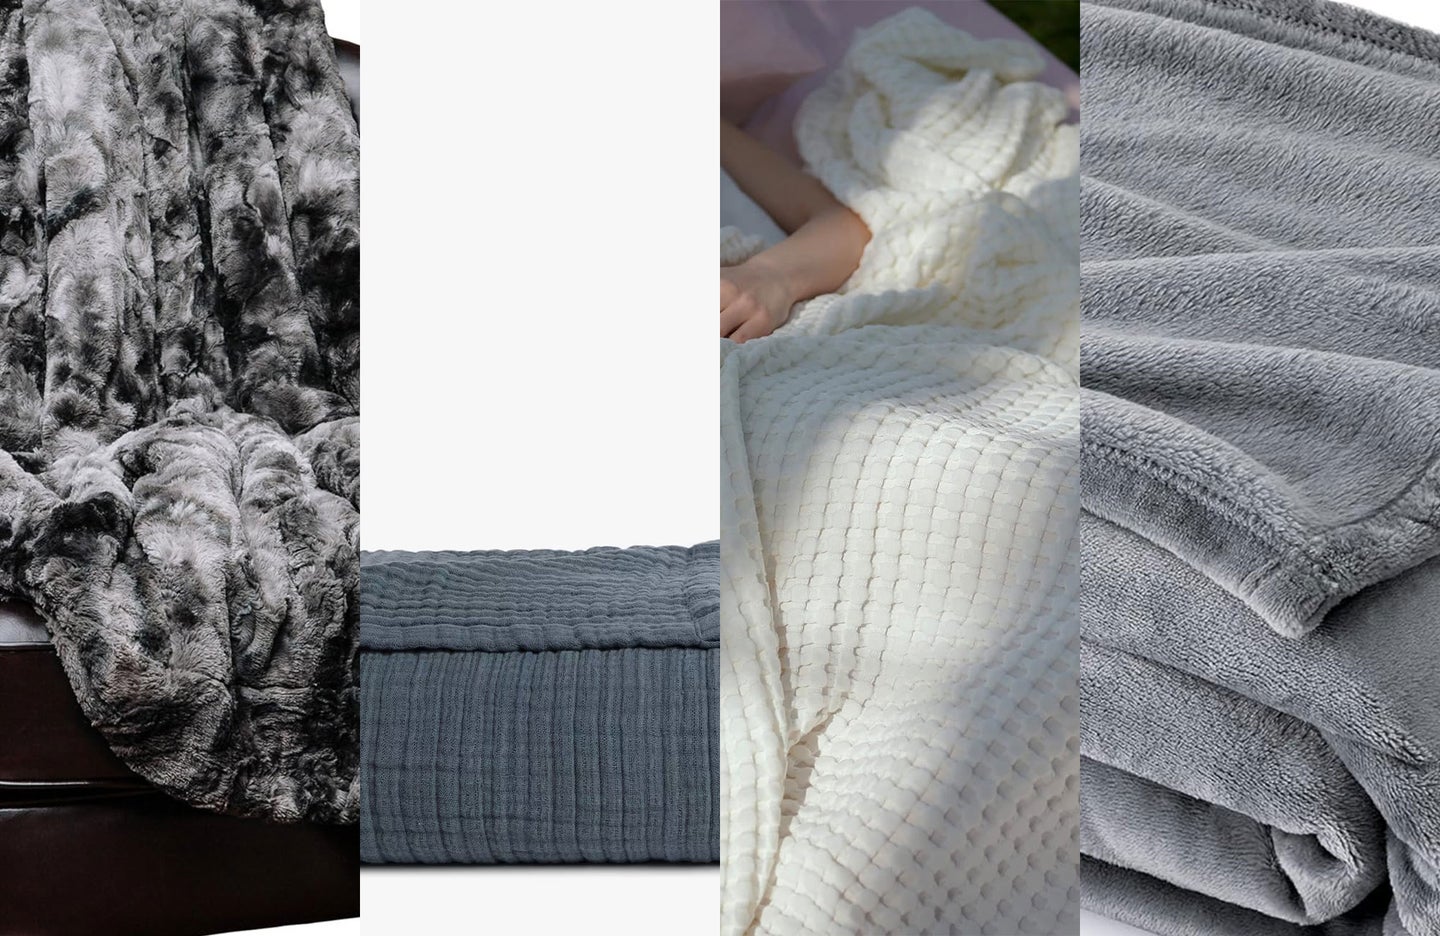 A lineup of the best blankets on a plain background.